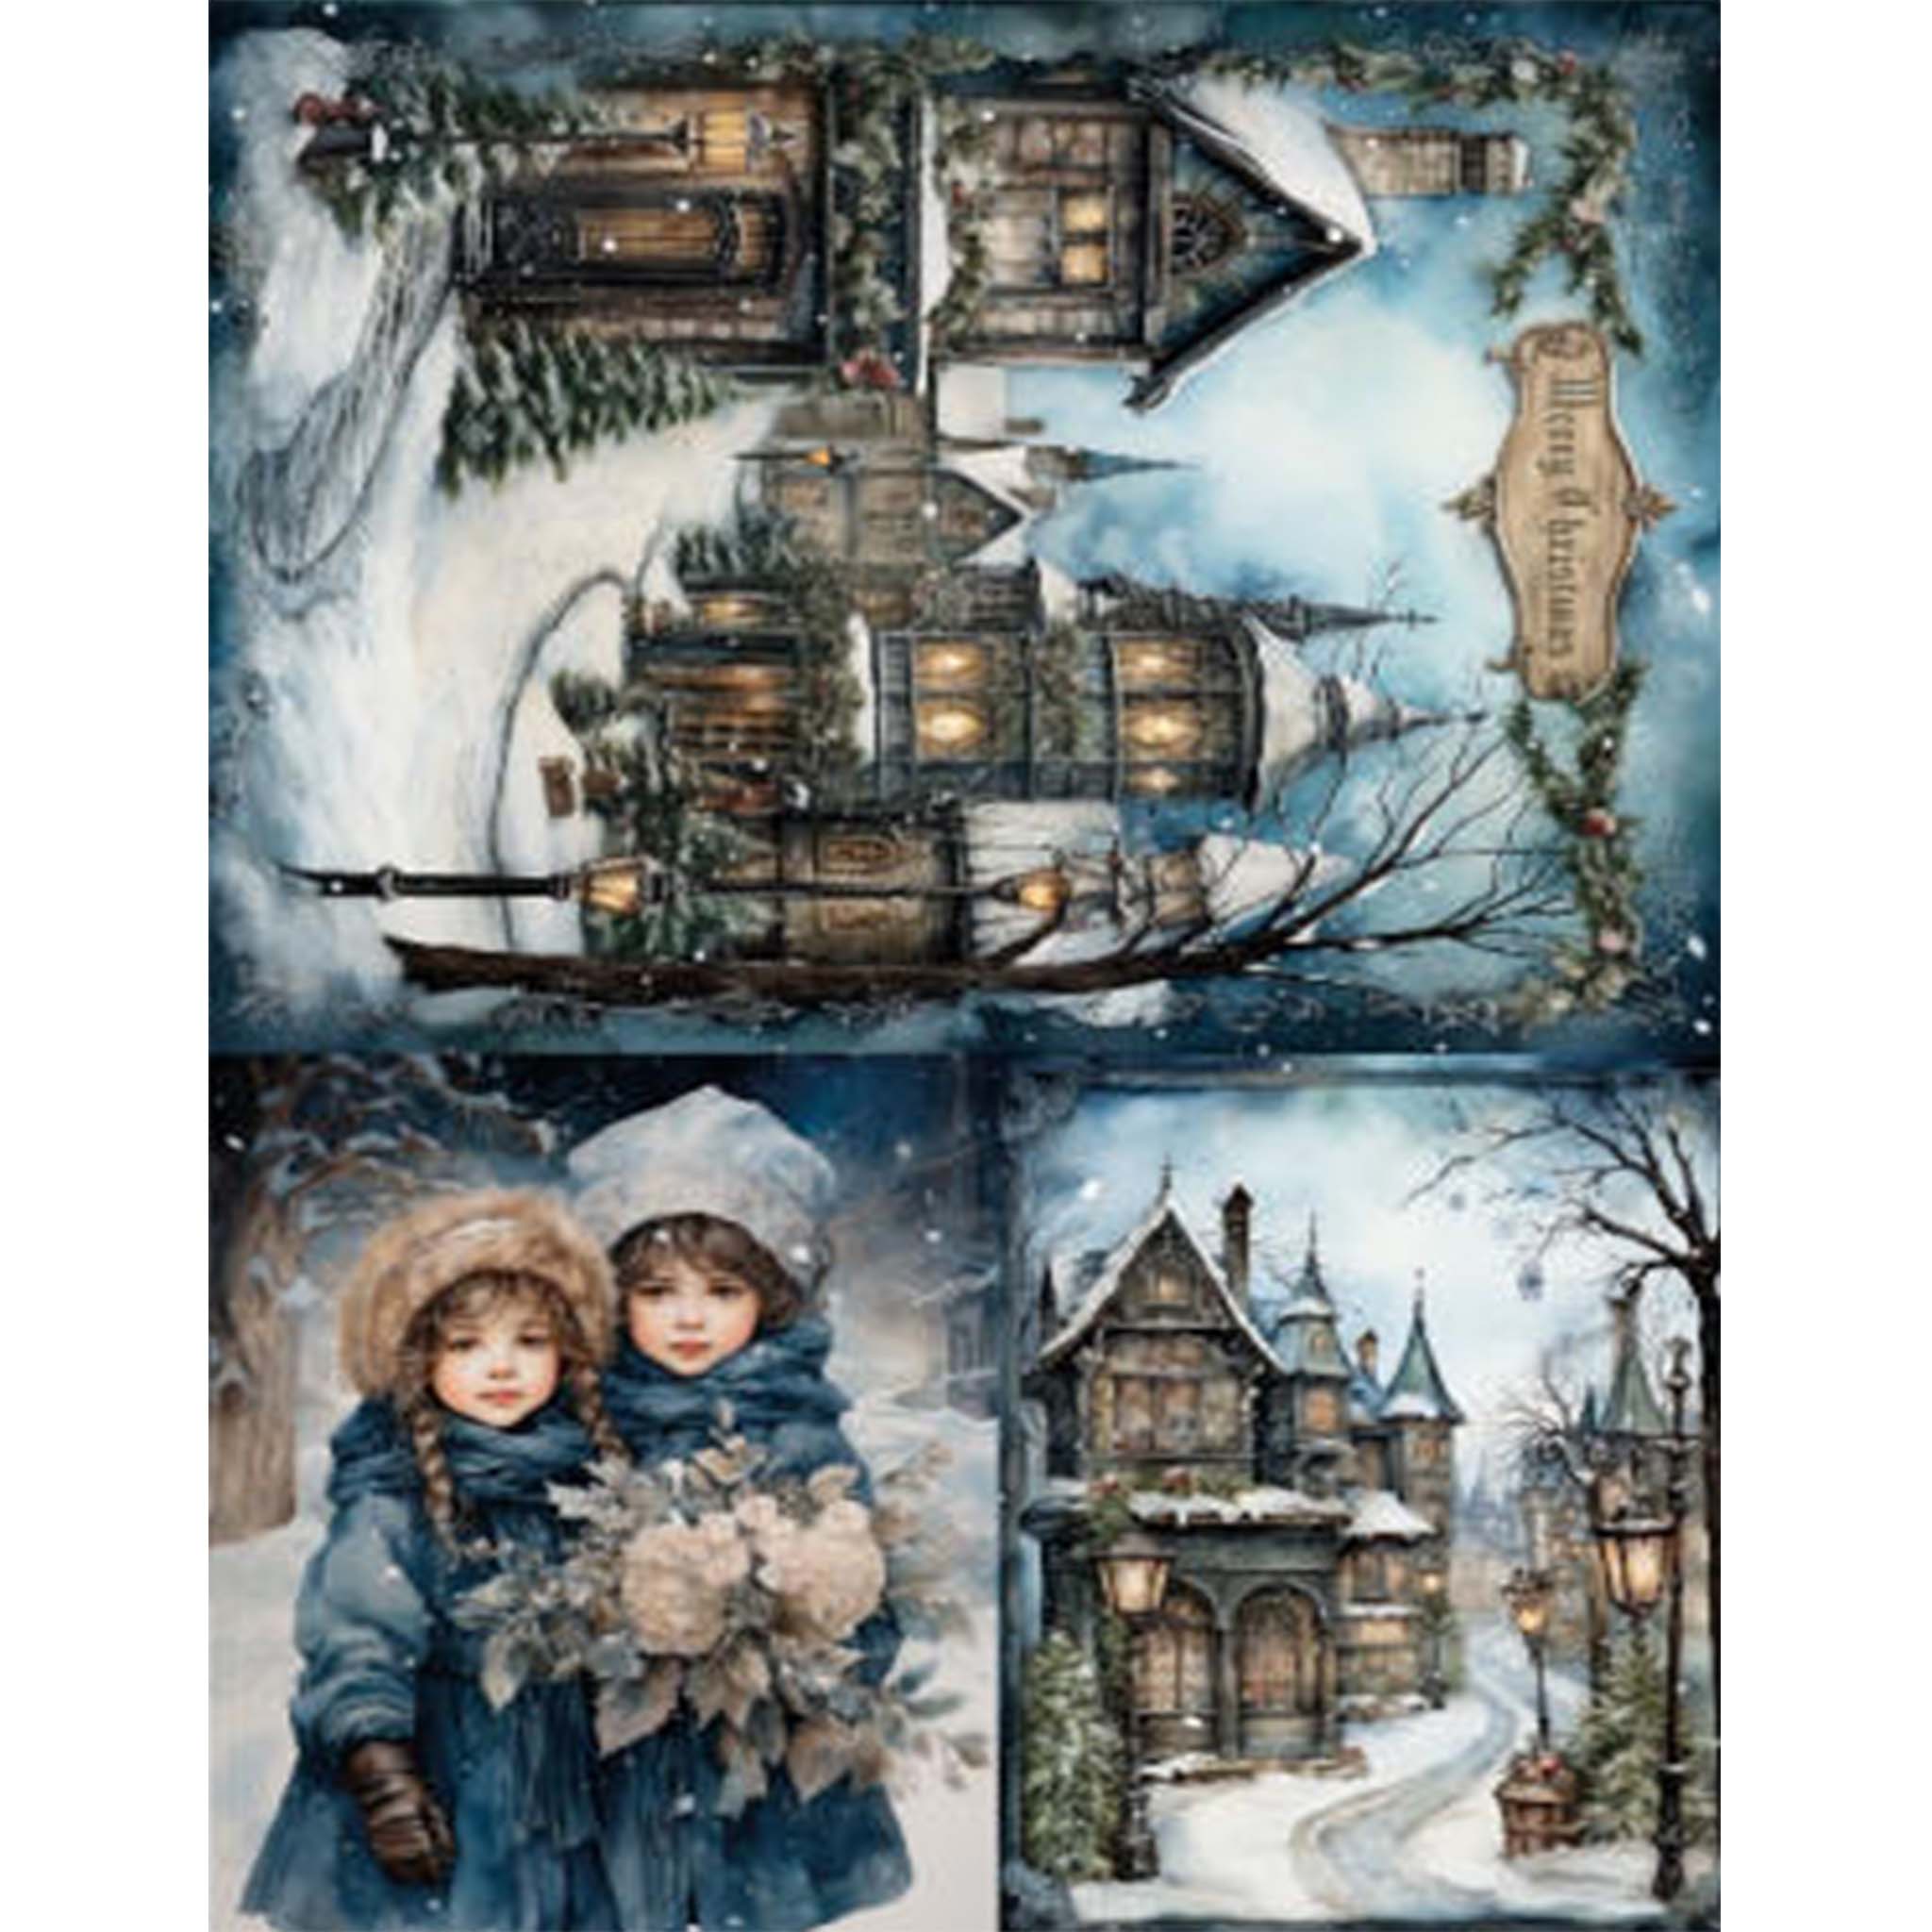 A4 Plus rice paper design featuring two stunning wintery scenes of a quaint village under a layer of snow and one image of two adorable girls bundled in their winter coats. White borders are on both sides.